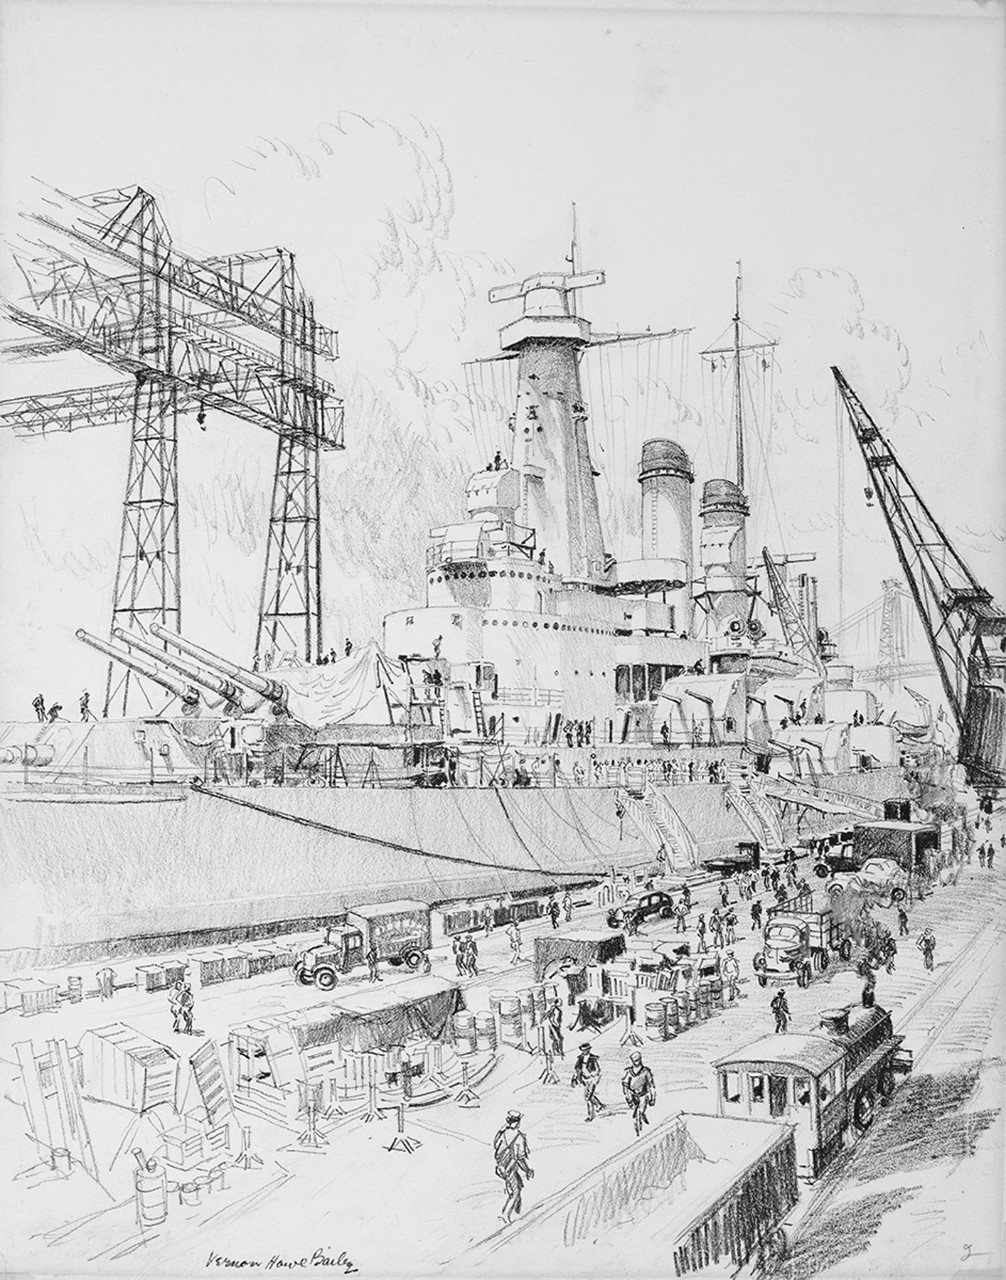 A ship at a pier being worked on by many people